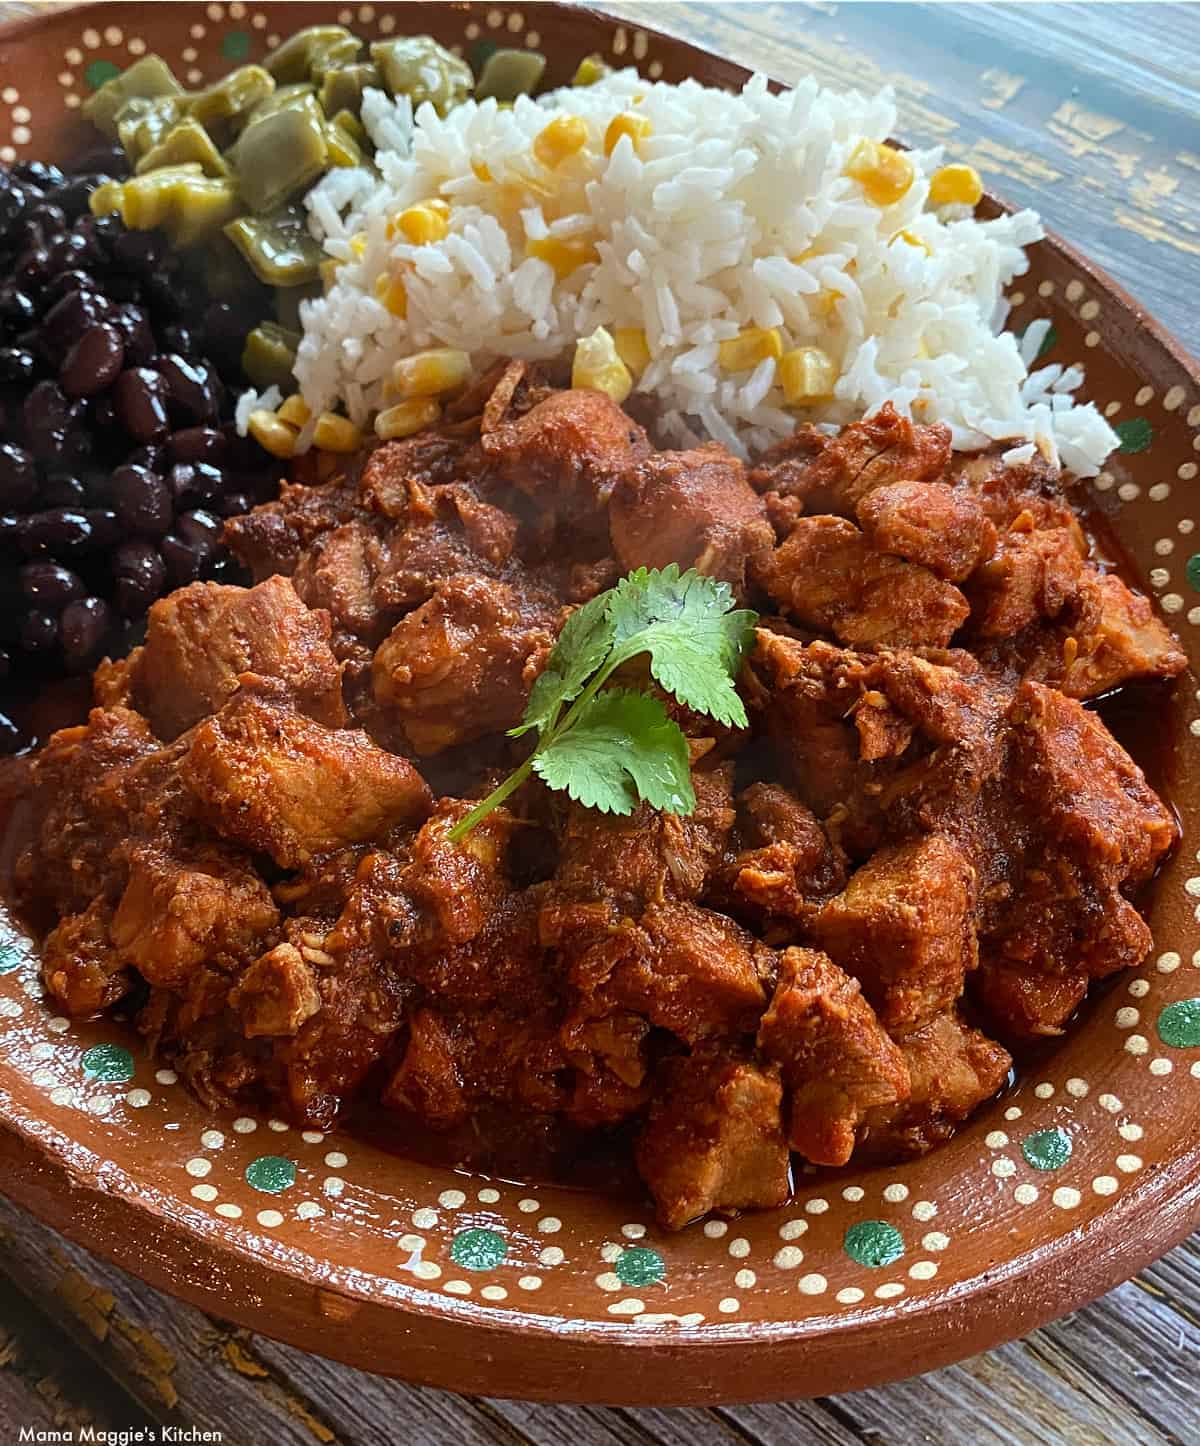 Asado de Puerco served on a decorative clay plate next to rice, beans, and nopales.